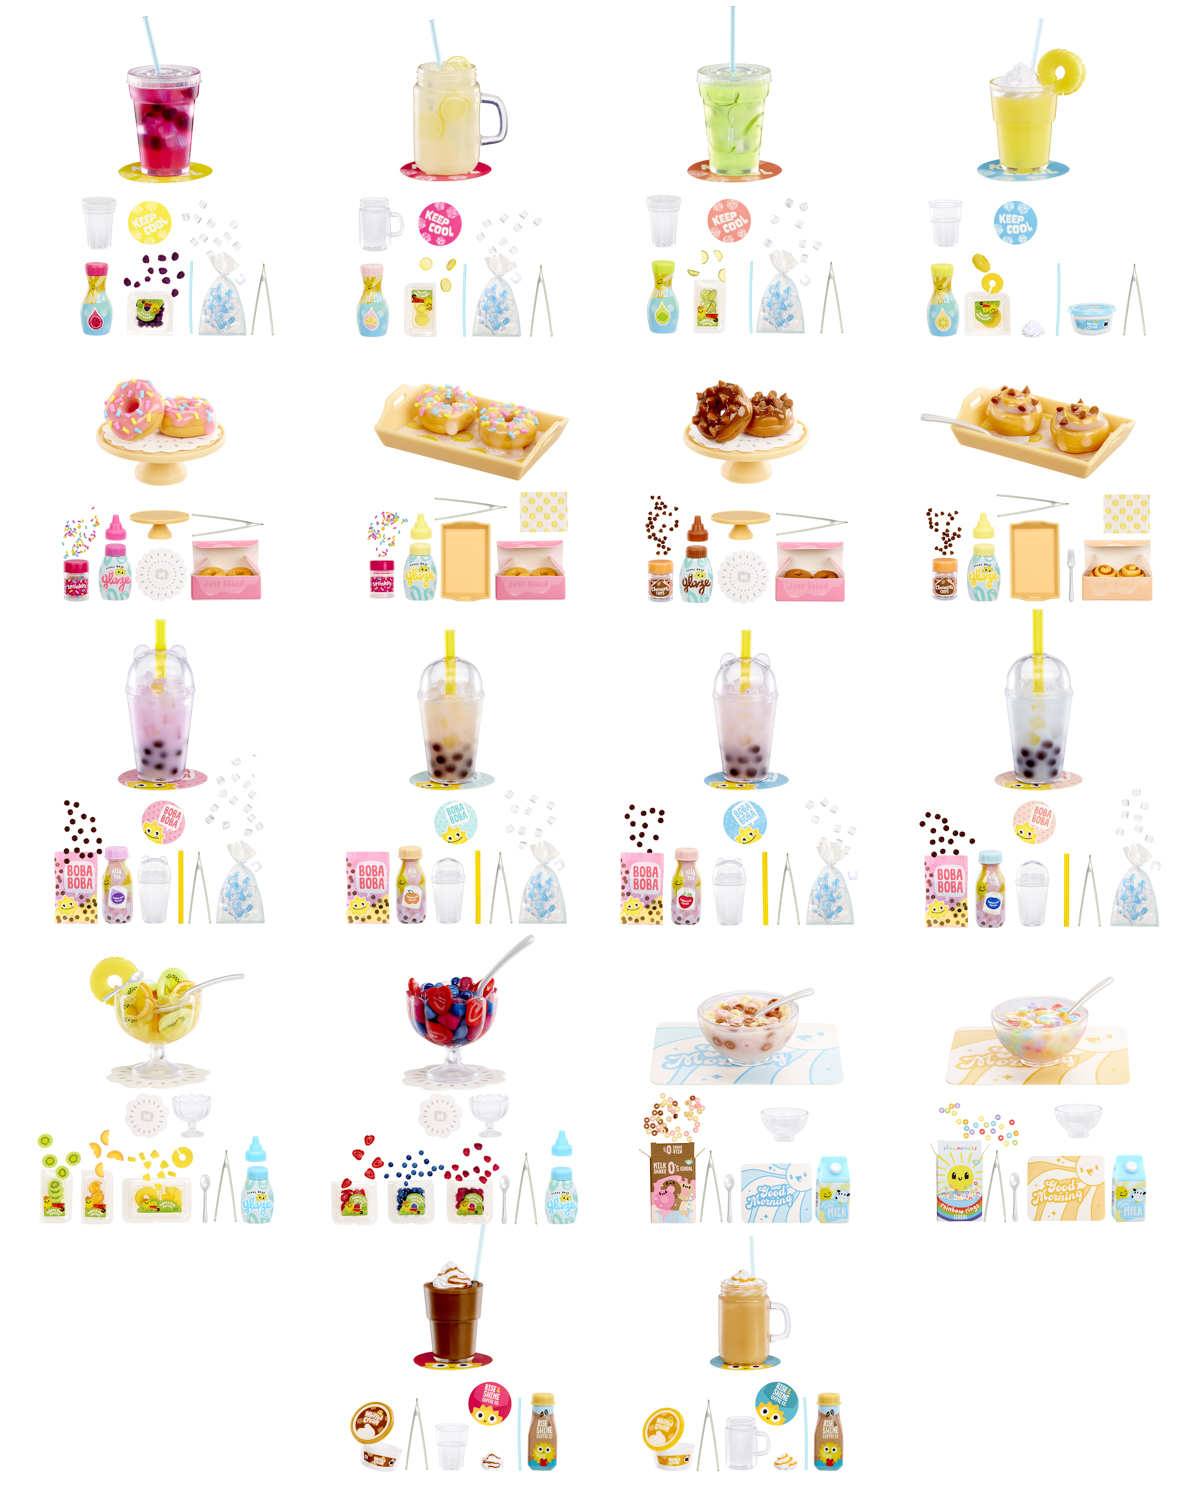 Miniverse Make It Mini Food Series 2 Mini Collectibles Cafe and Diner 